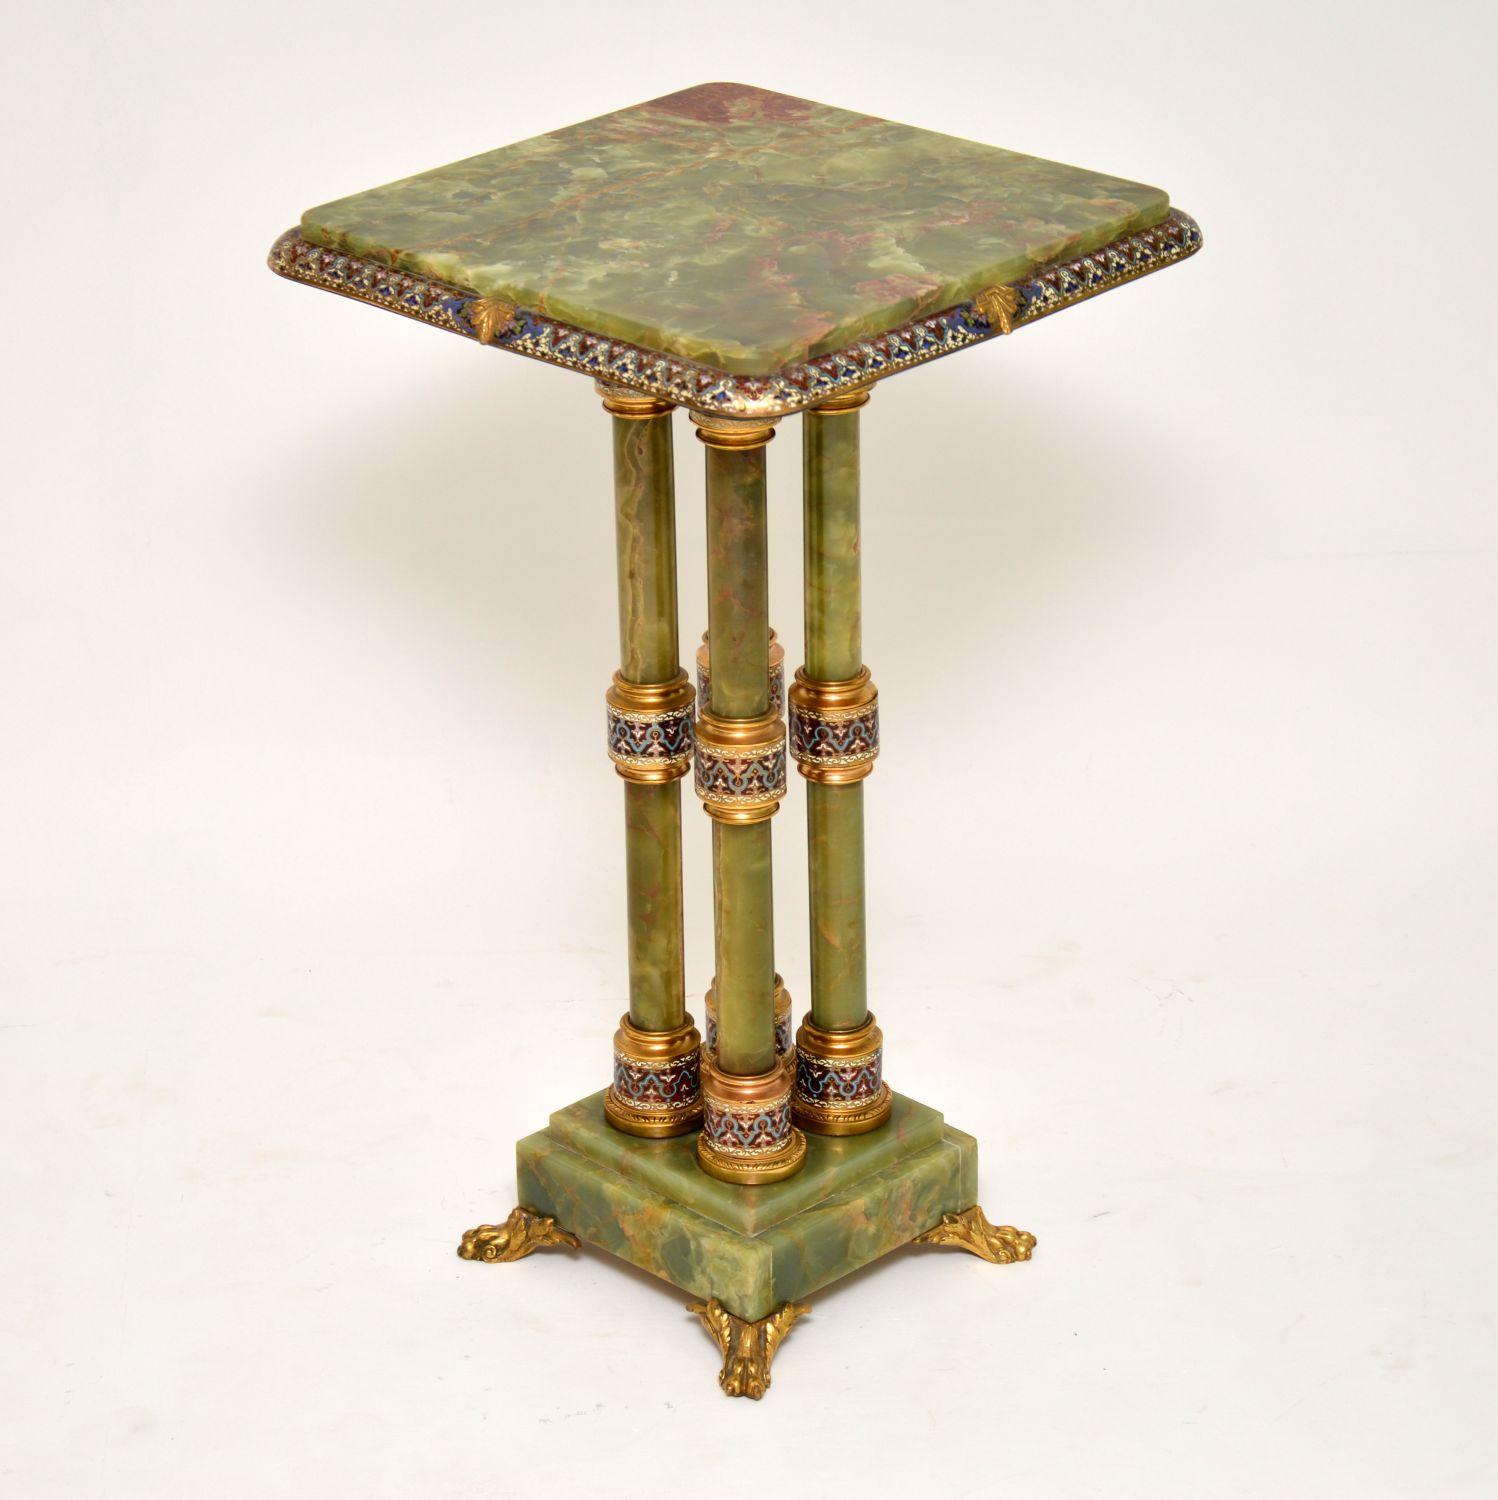 Neoclassical Antique Champlevé and Cloisonné Enamel Mounted Git Bronze Onyx Table Stand